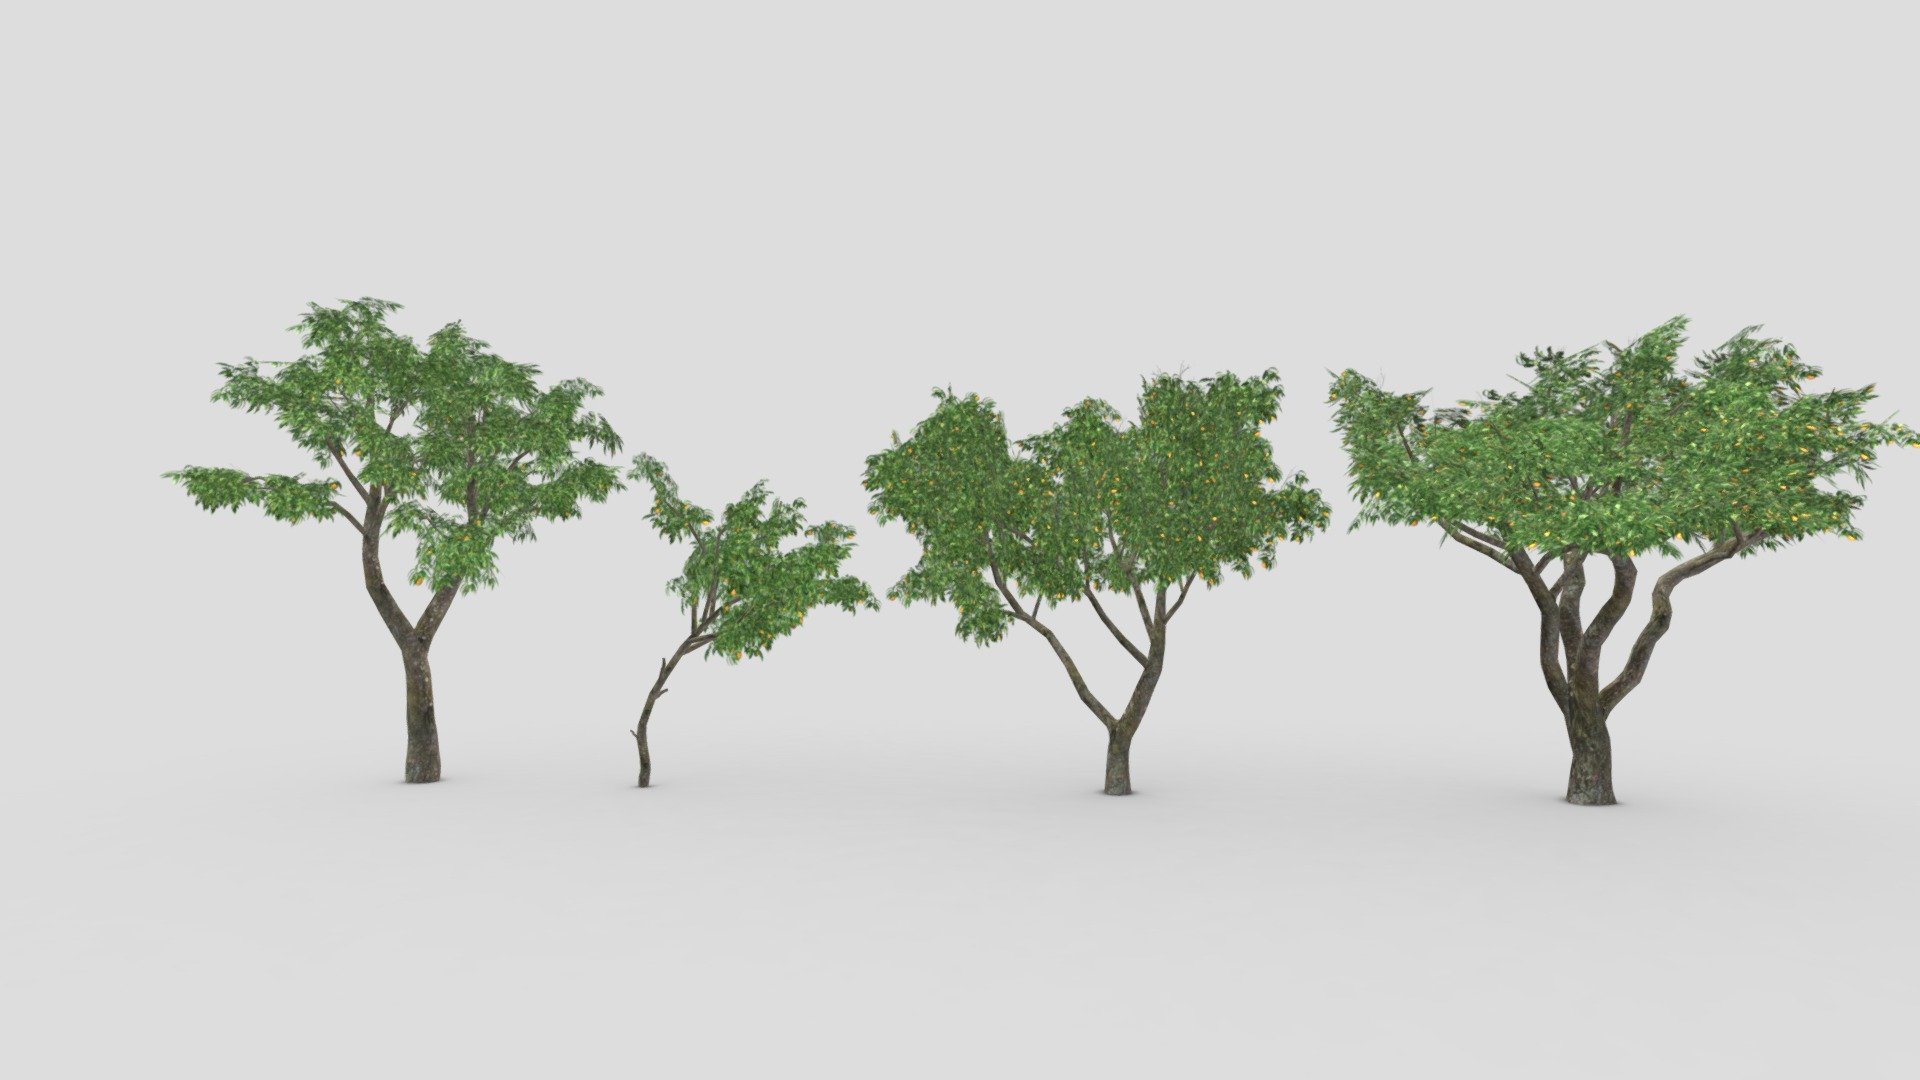 This collection contains 4 3D low-poly poly models of Orange Tree. You can use these models in your projects 3d model